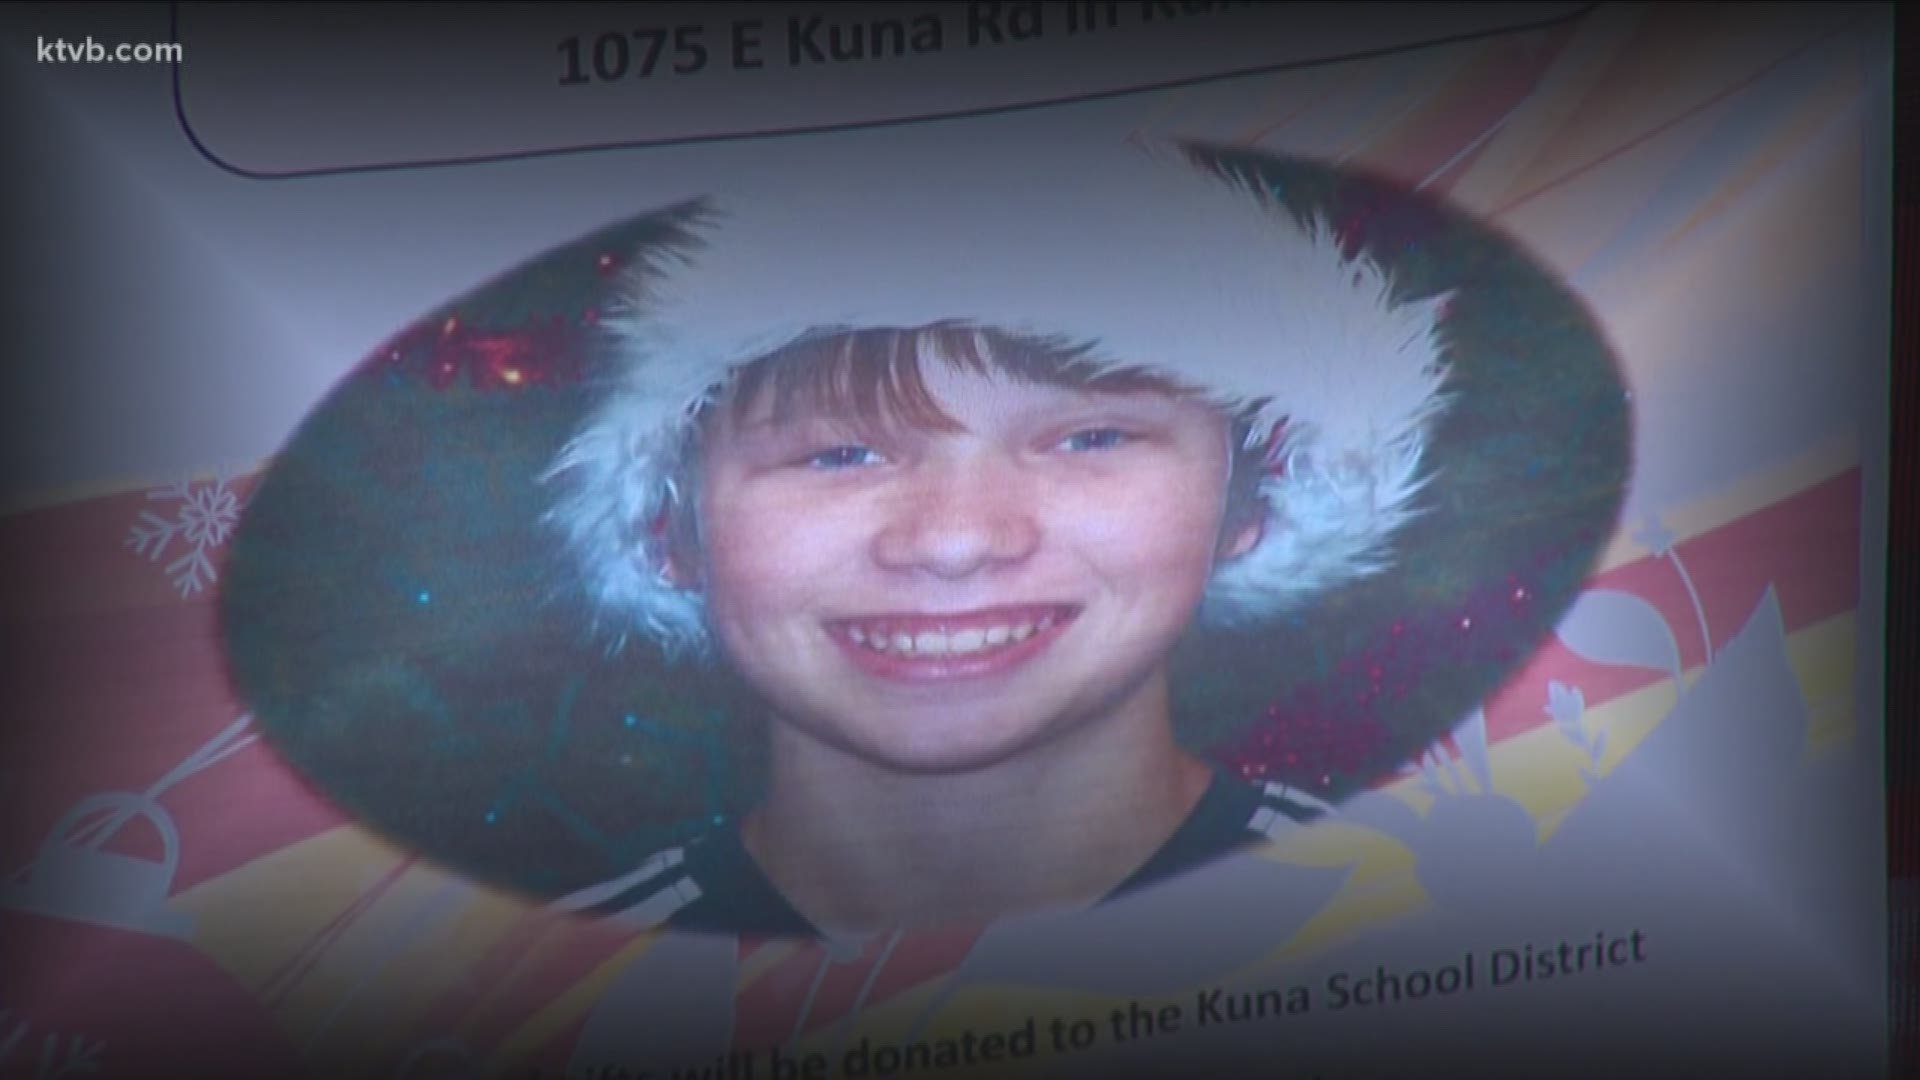 All toys and gifts collected will be given to the Kuna School District.